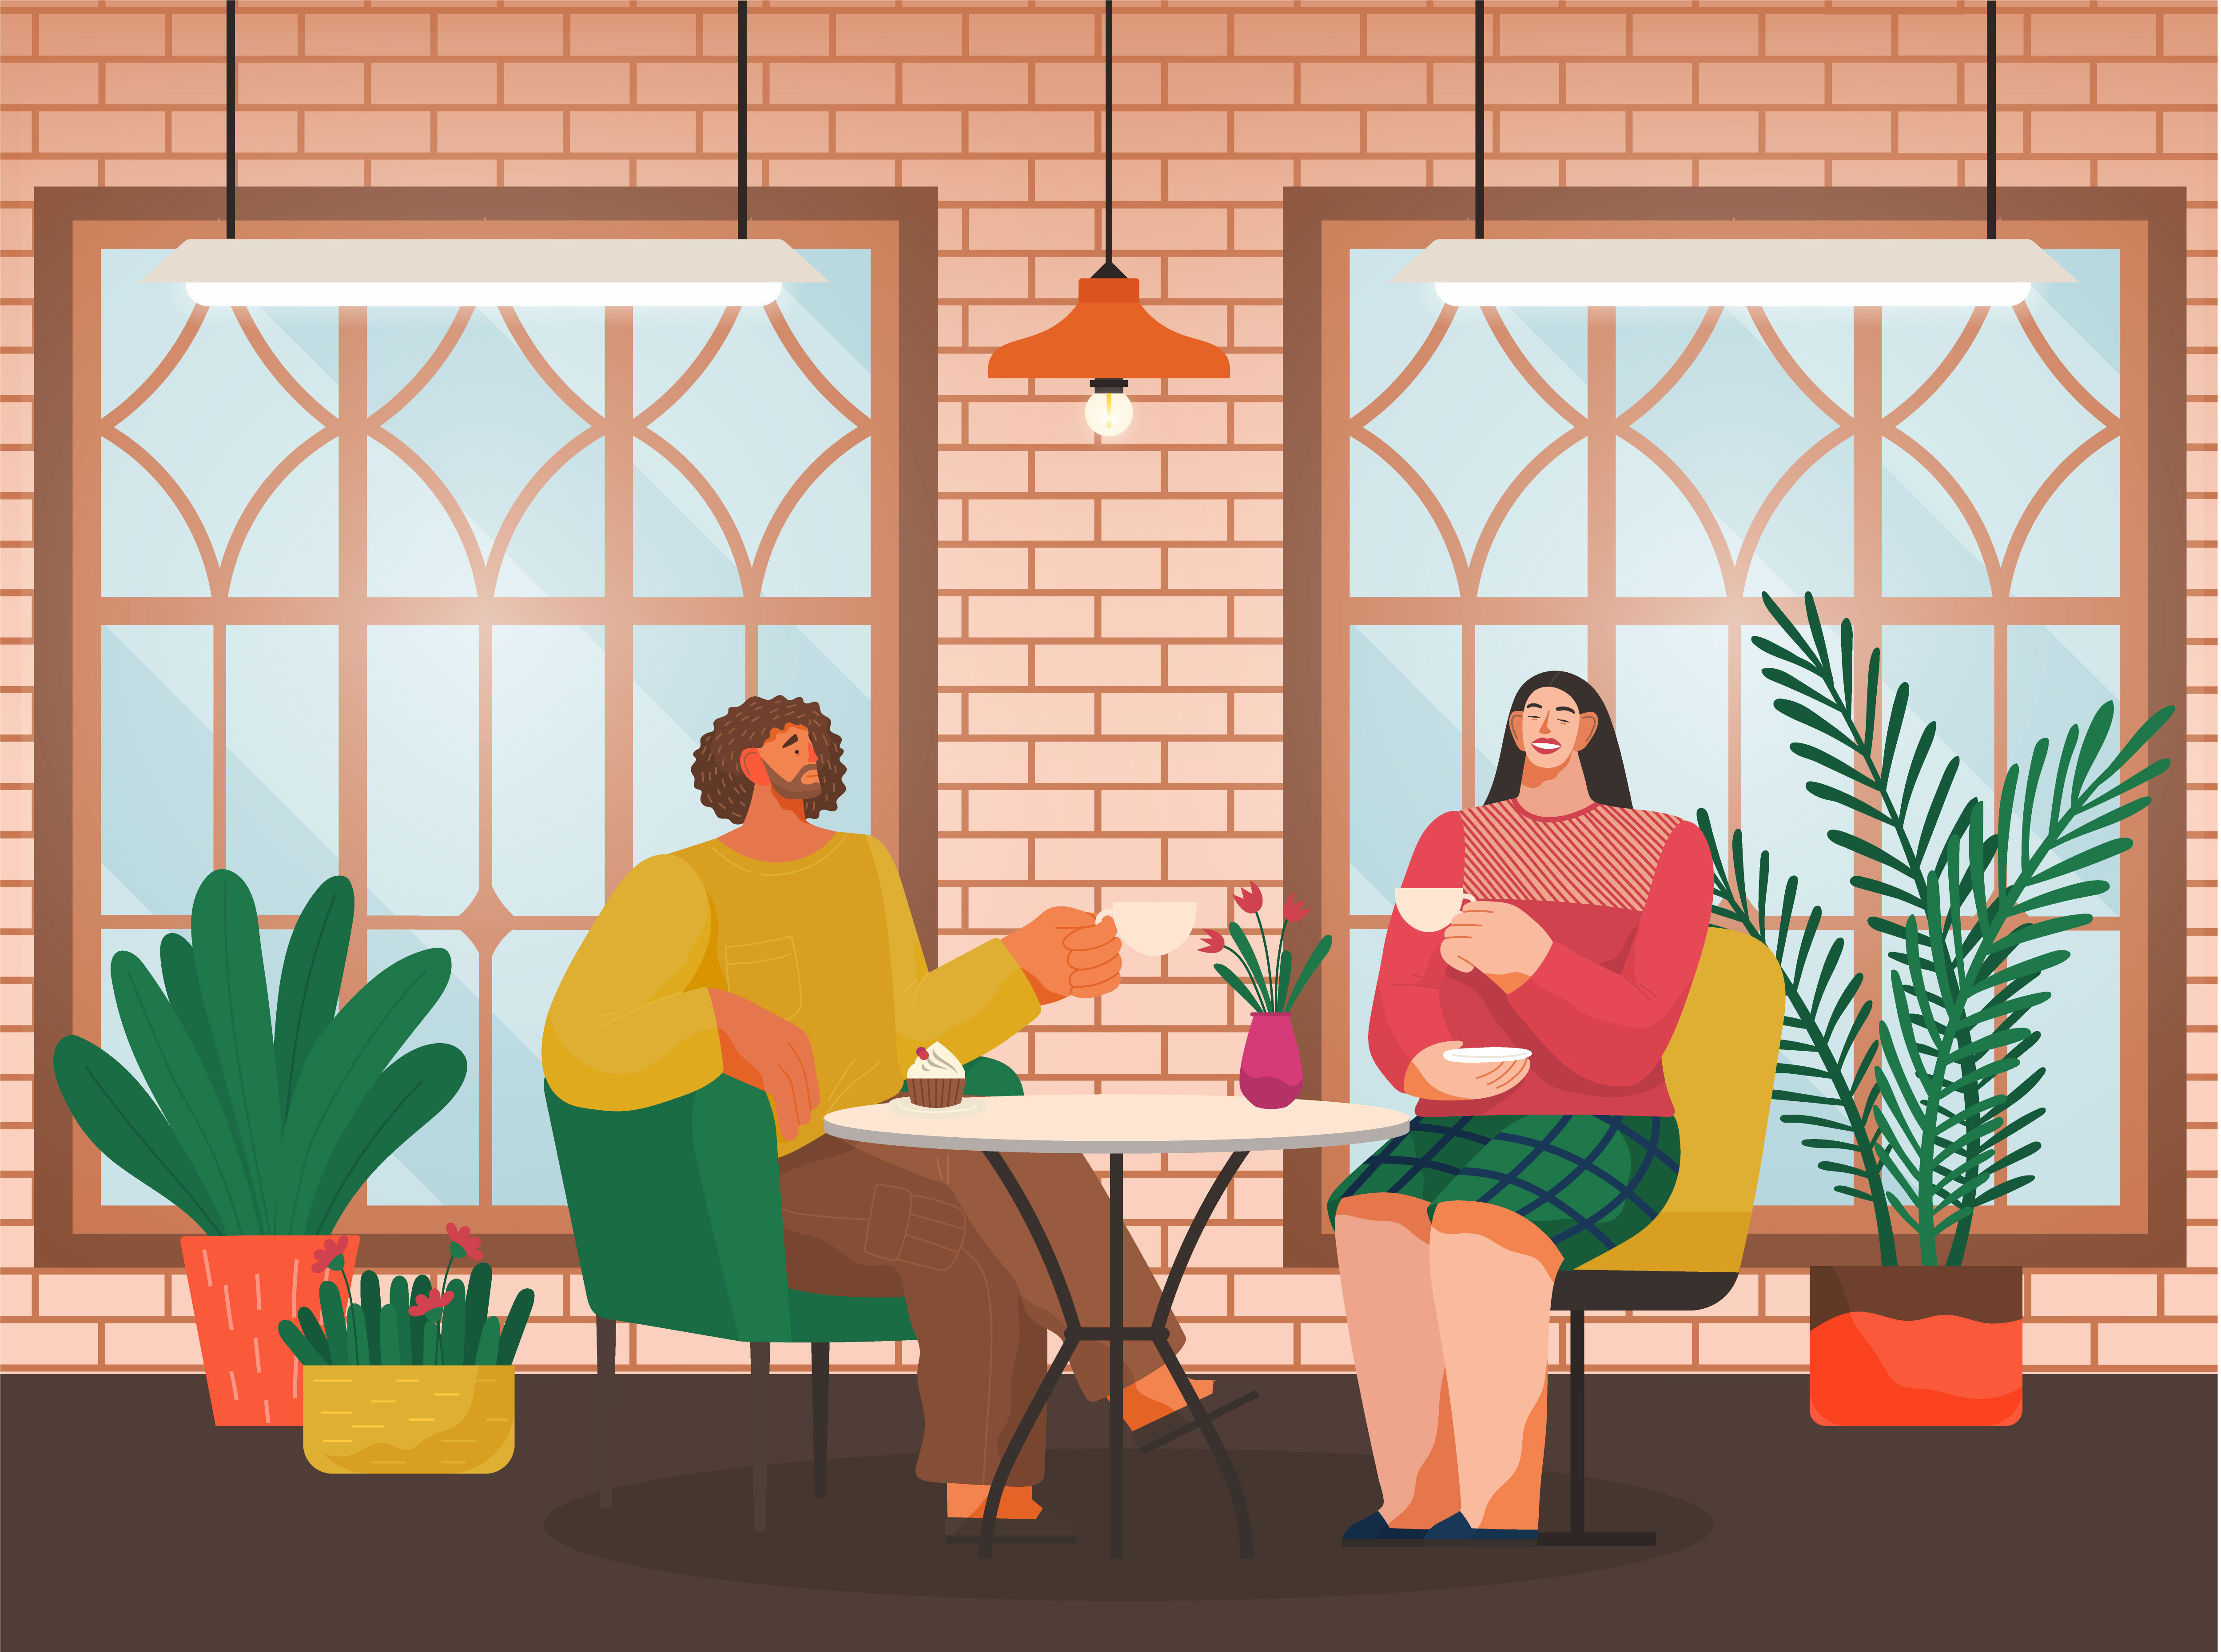 Cafe shop and people relaxing, eating out, modern place interior, drink and snack vector. Man and woman chat, have rest or enjoy free time. Restaurant in loft style, couple drinks coffee illustration. Eating Out, Couple in Cafe Drinks Coffee at Table